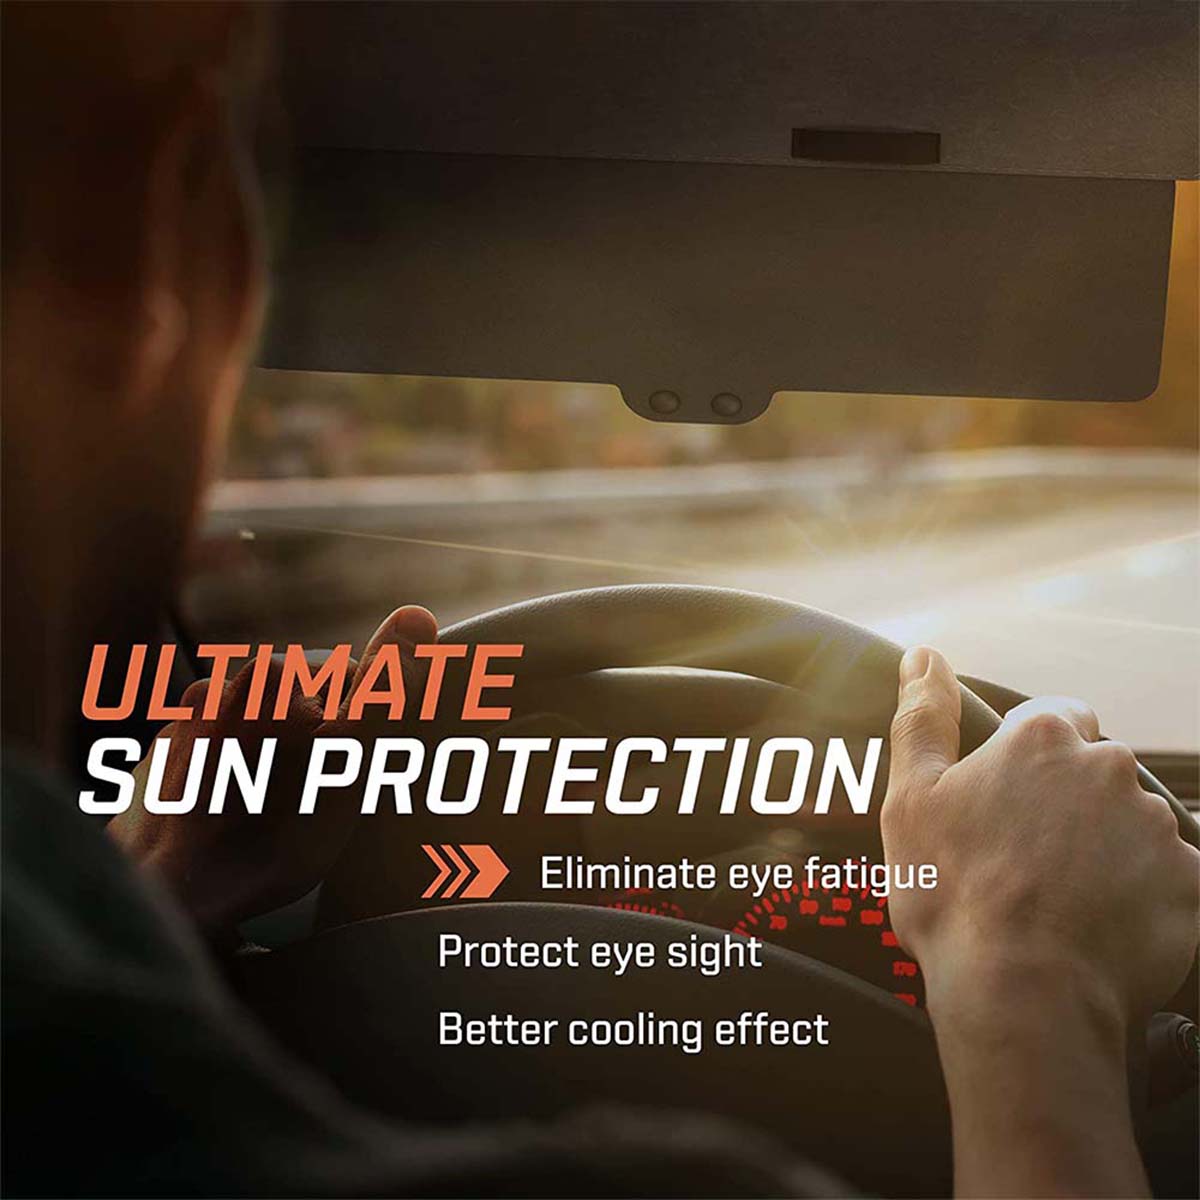 Delicate Leather Polarized Sun Visor Sunshade Extender for Car with Polycarbonate Lens, Custom fit for Chrysler, Anti-Glare Car Sun Visor Protects from Sun Glare, Snow Blindness, UV Rays, Universal for Cars, SUVs - Delicate Leather